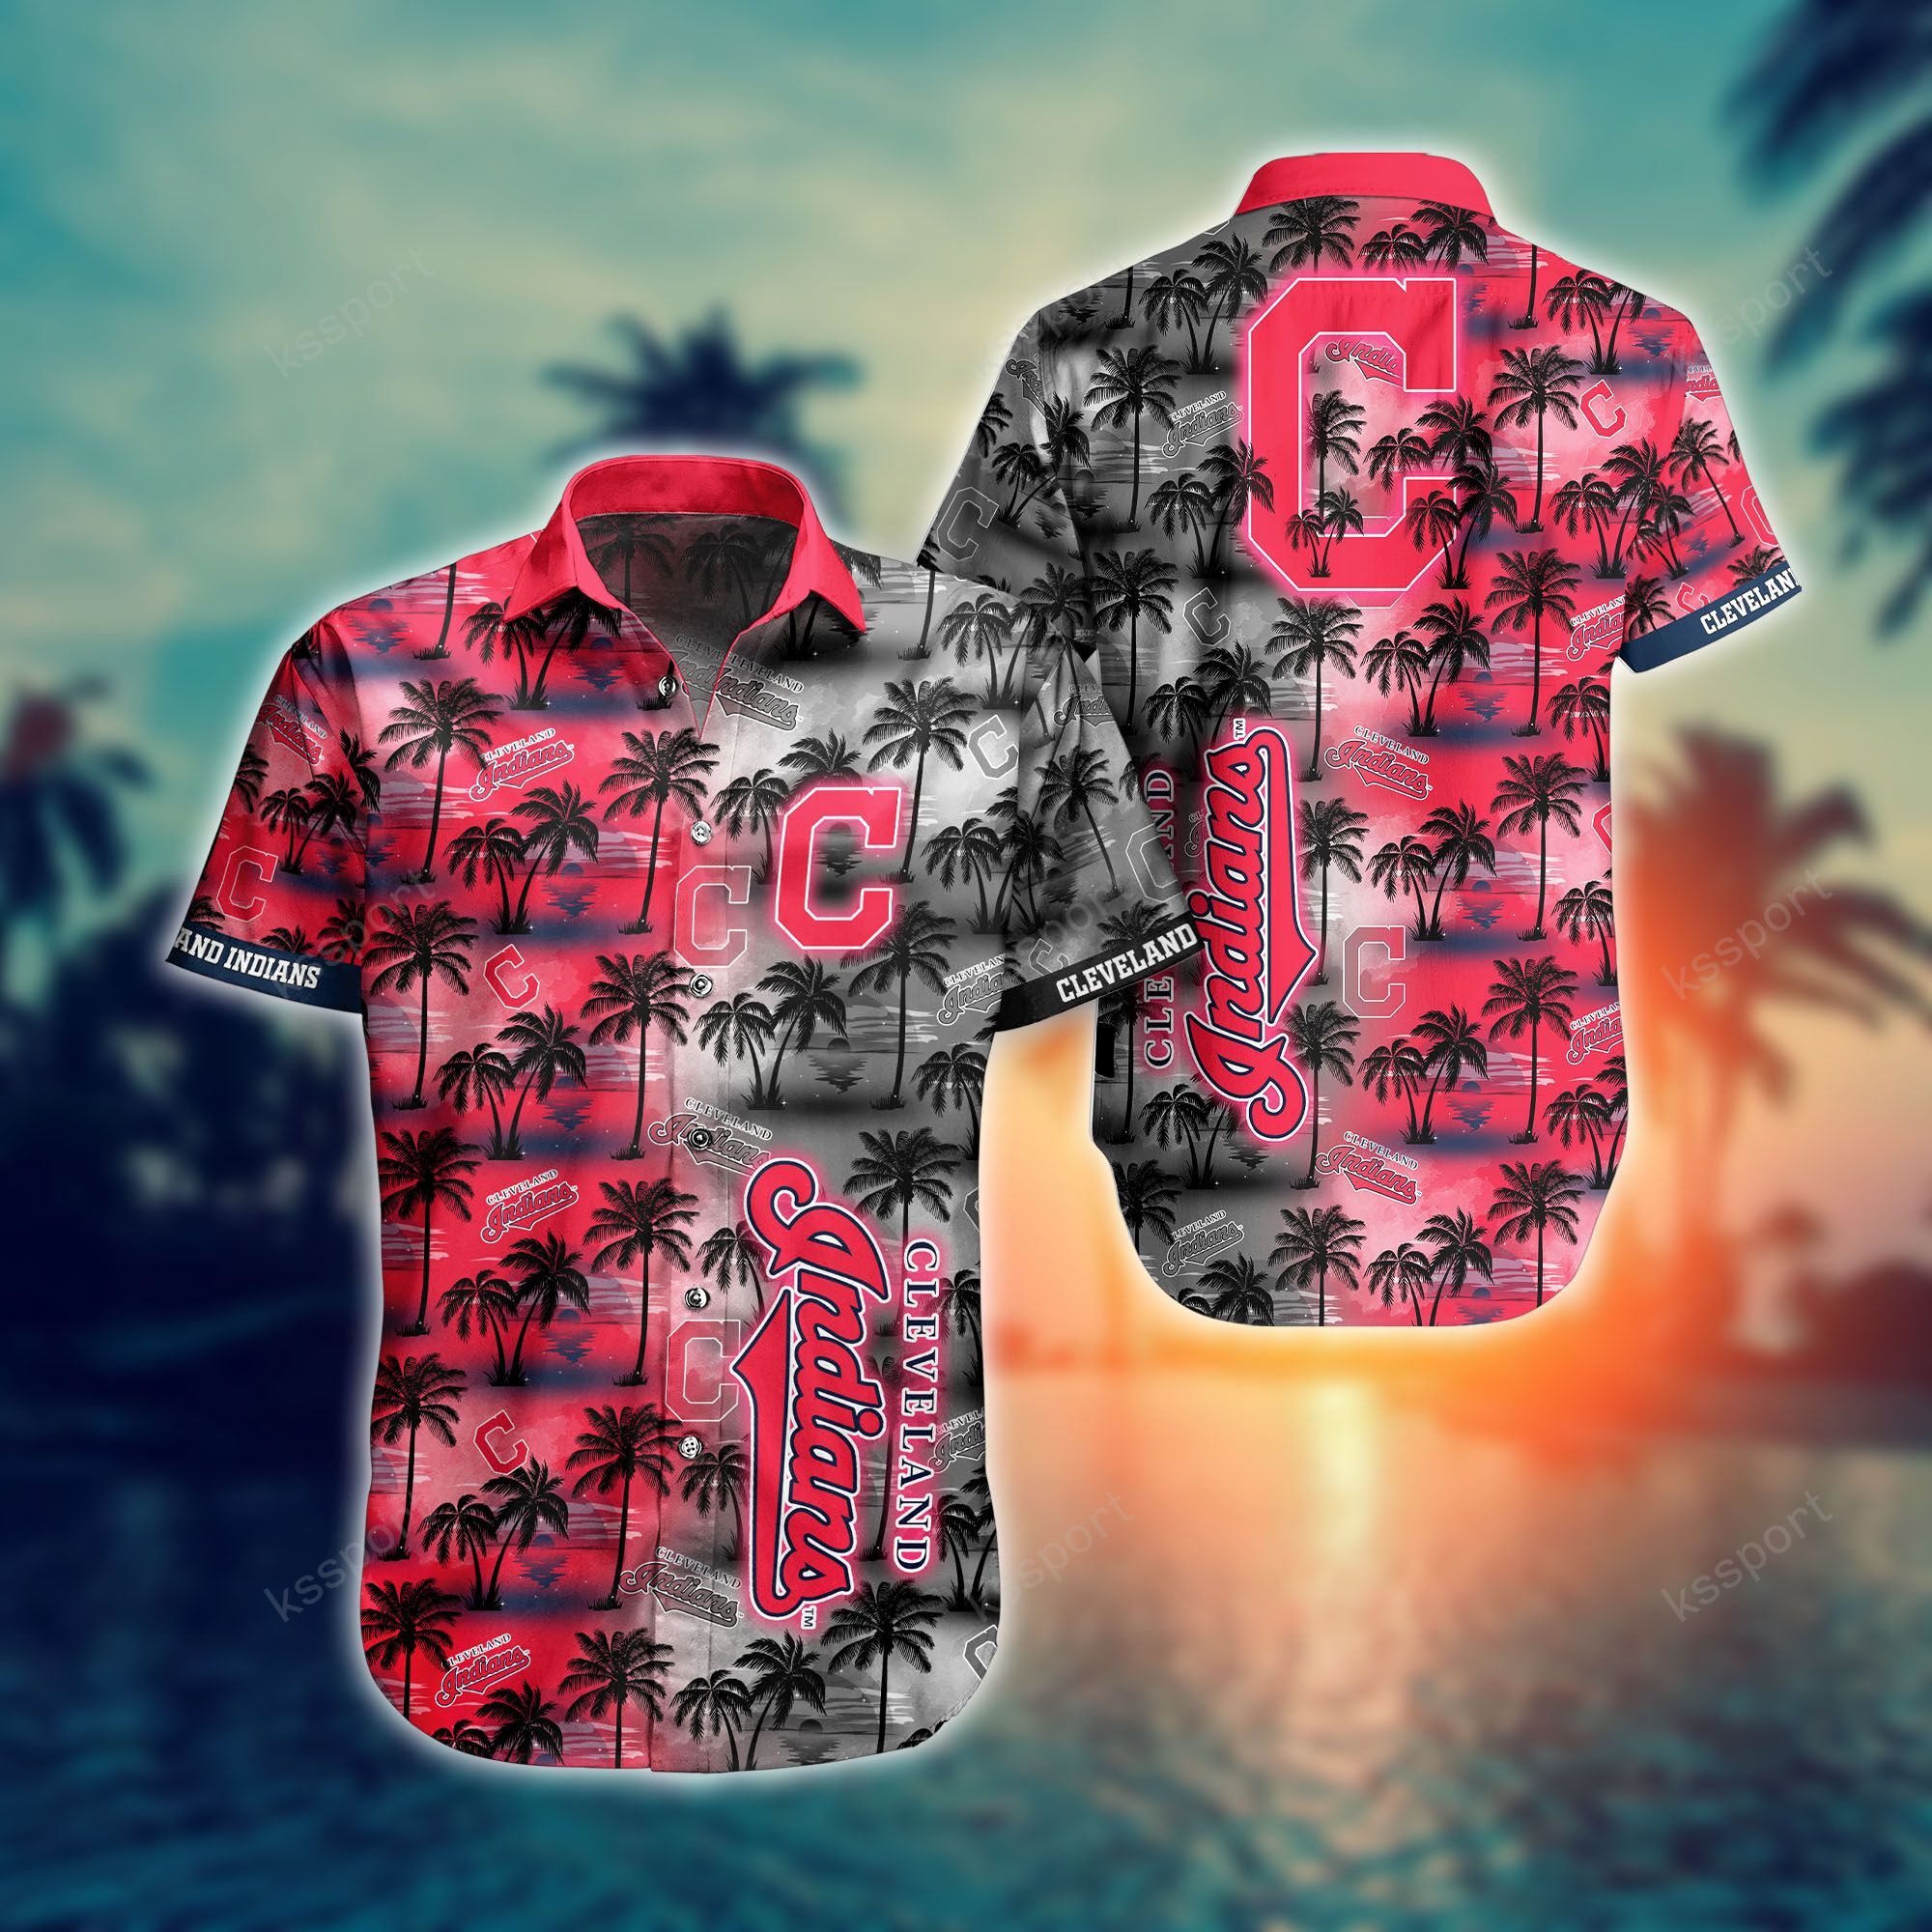 Treat yourself to a cool Hawaiian set today! 122